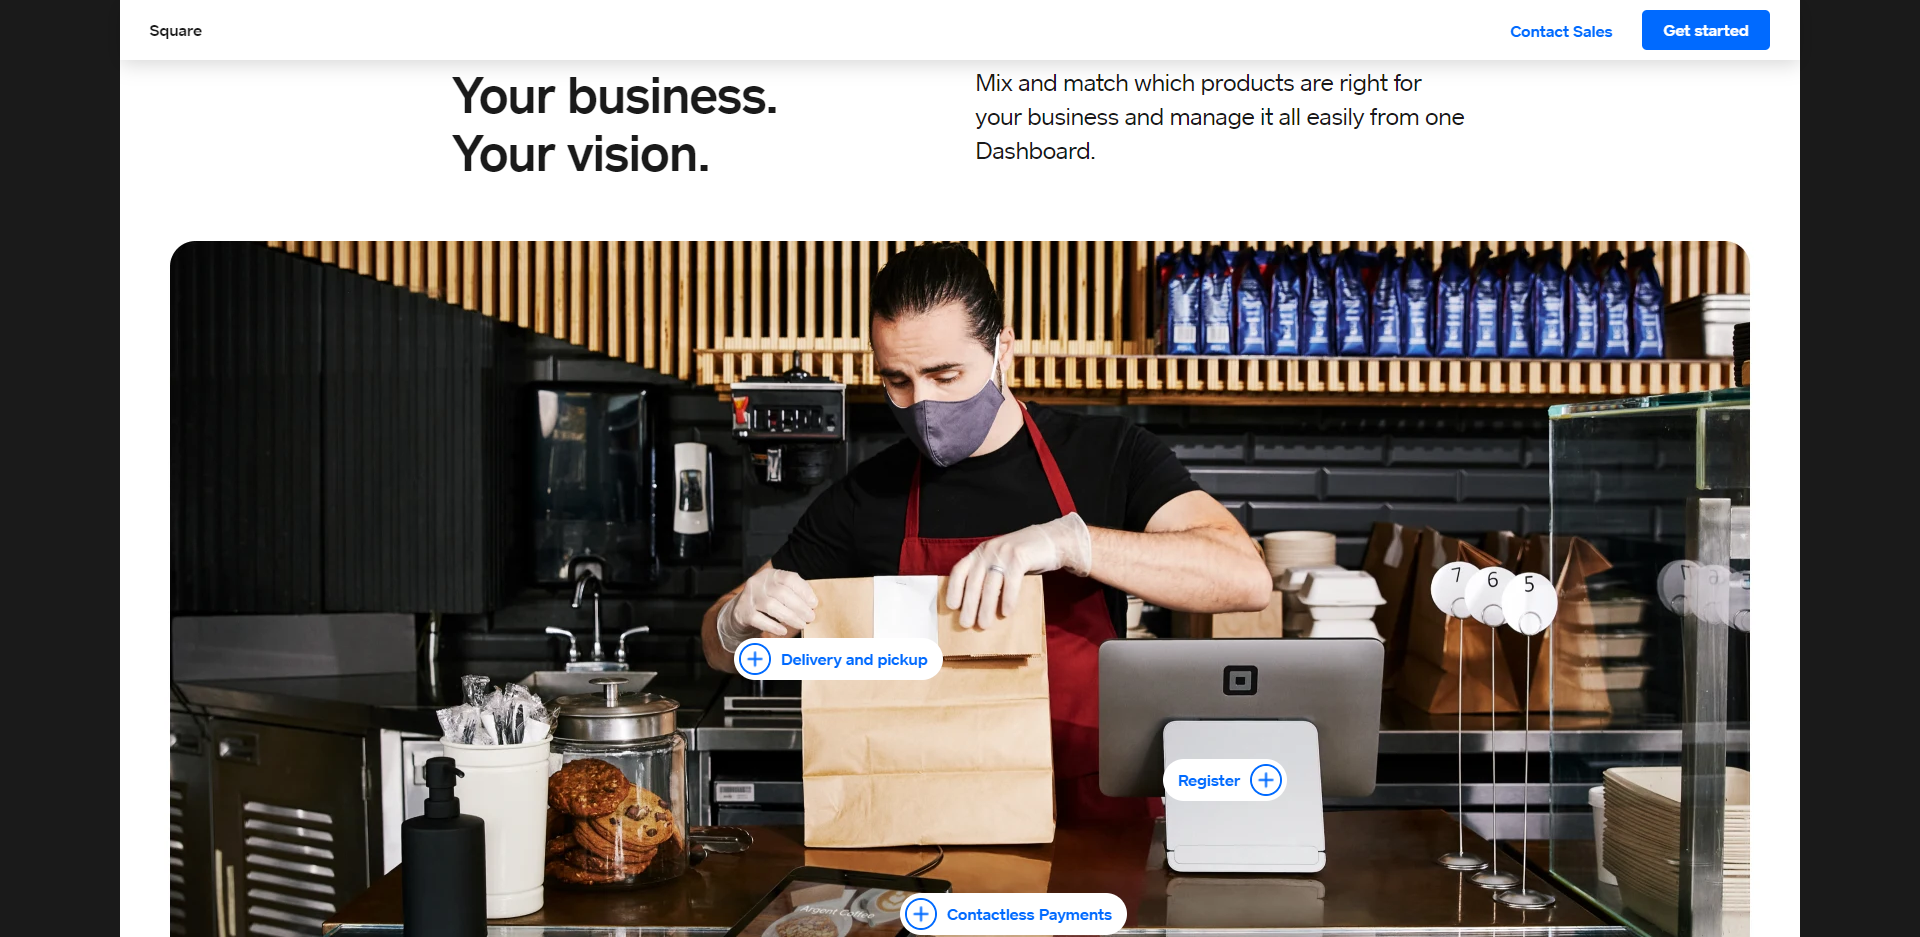 Square product / service